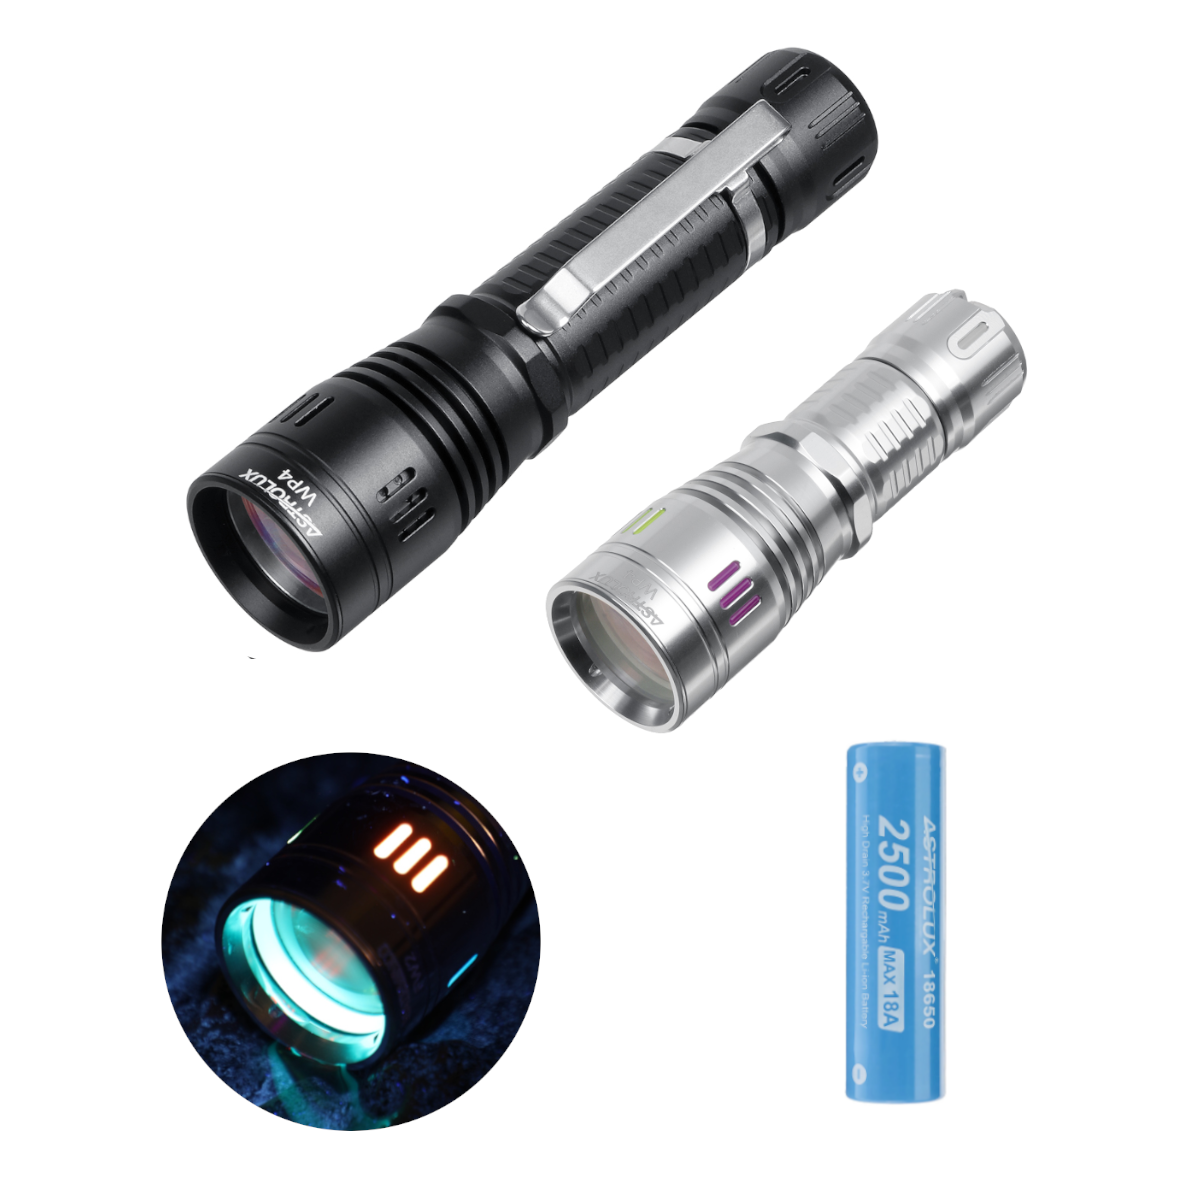 Find Astrolux WP4 1303m 310LM LEP Flashlight Waterproof Outdoor Search Camping Hunting Strong Thrower DIY EDC Flashlight With Glow Ring 18650 Battery for Sale on Gipsybee.com with cryptocurrencies